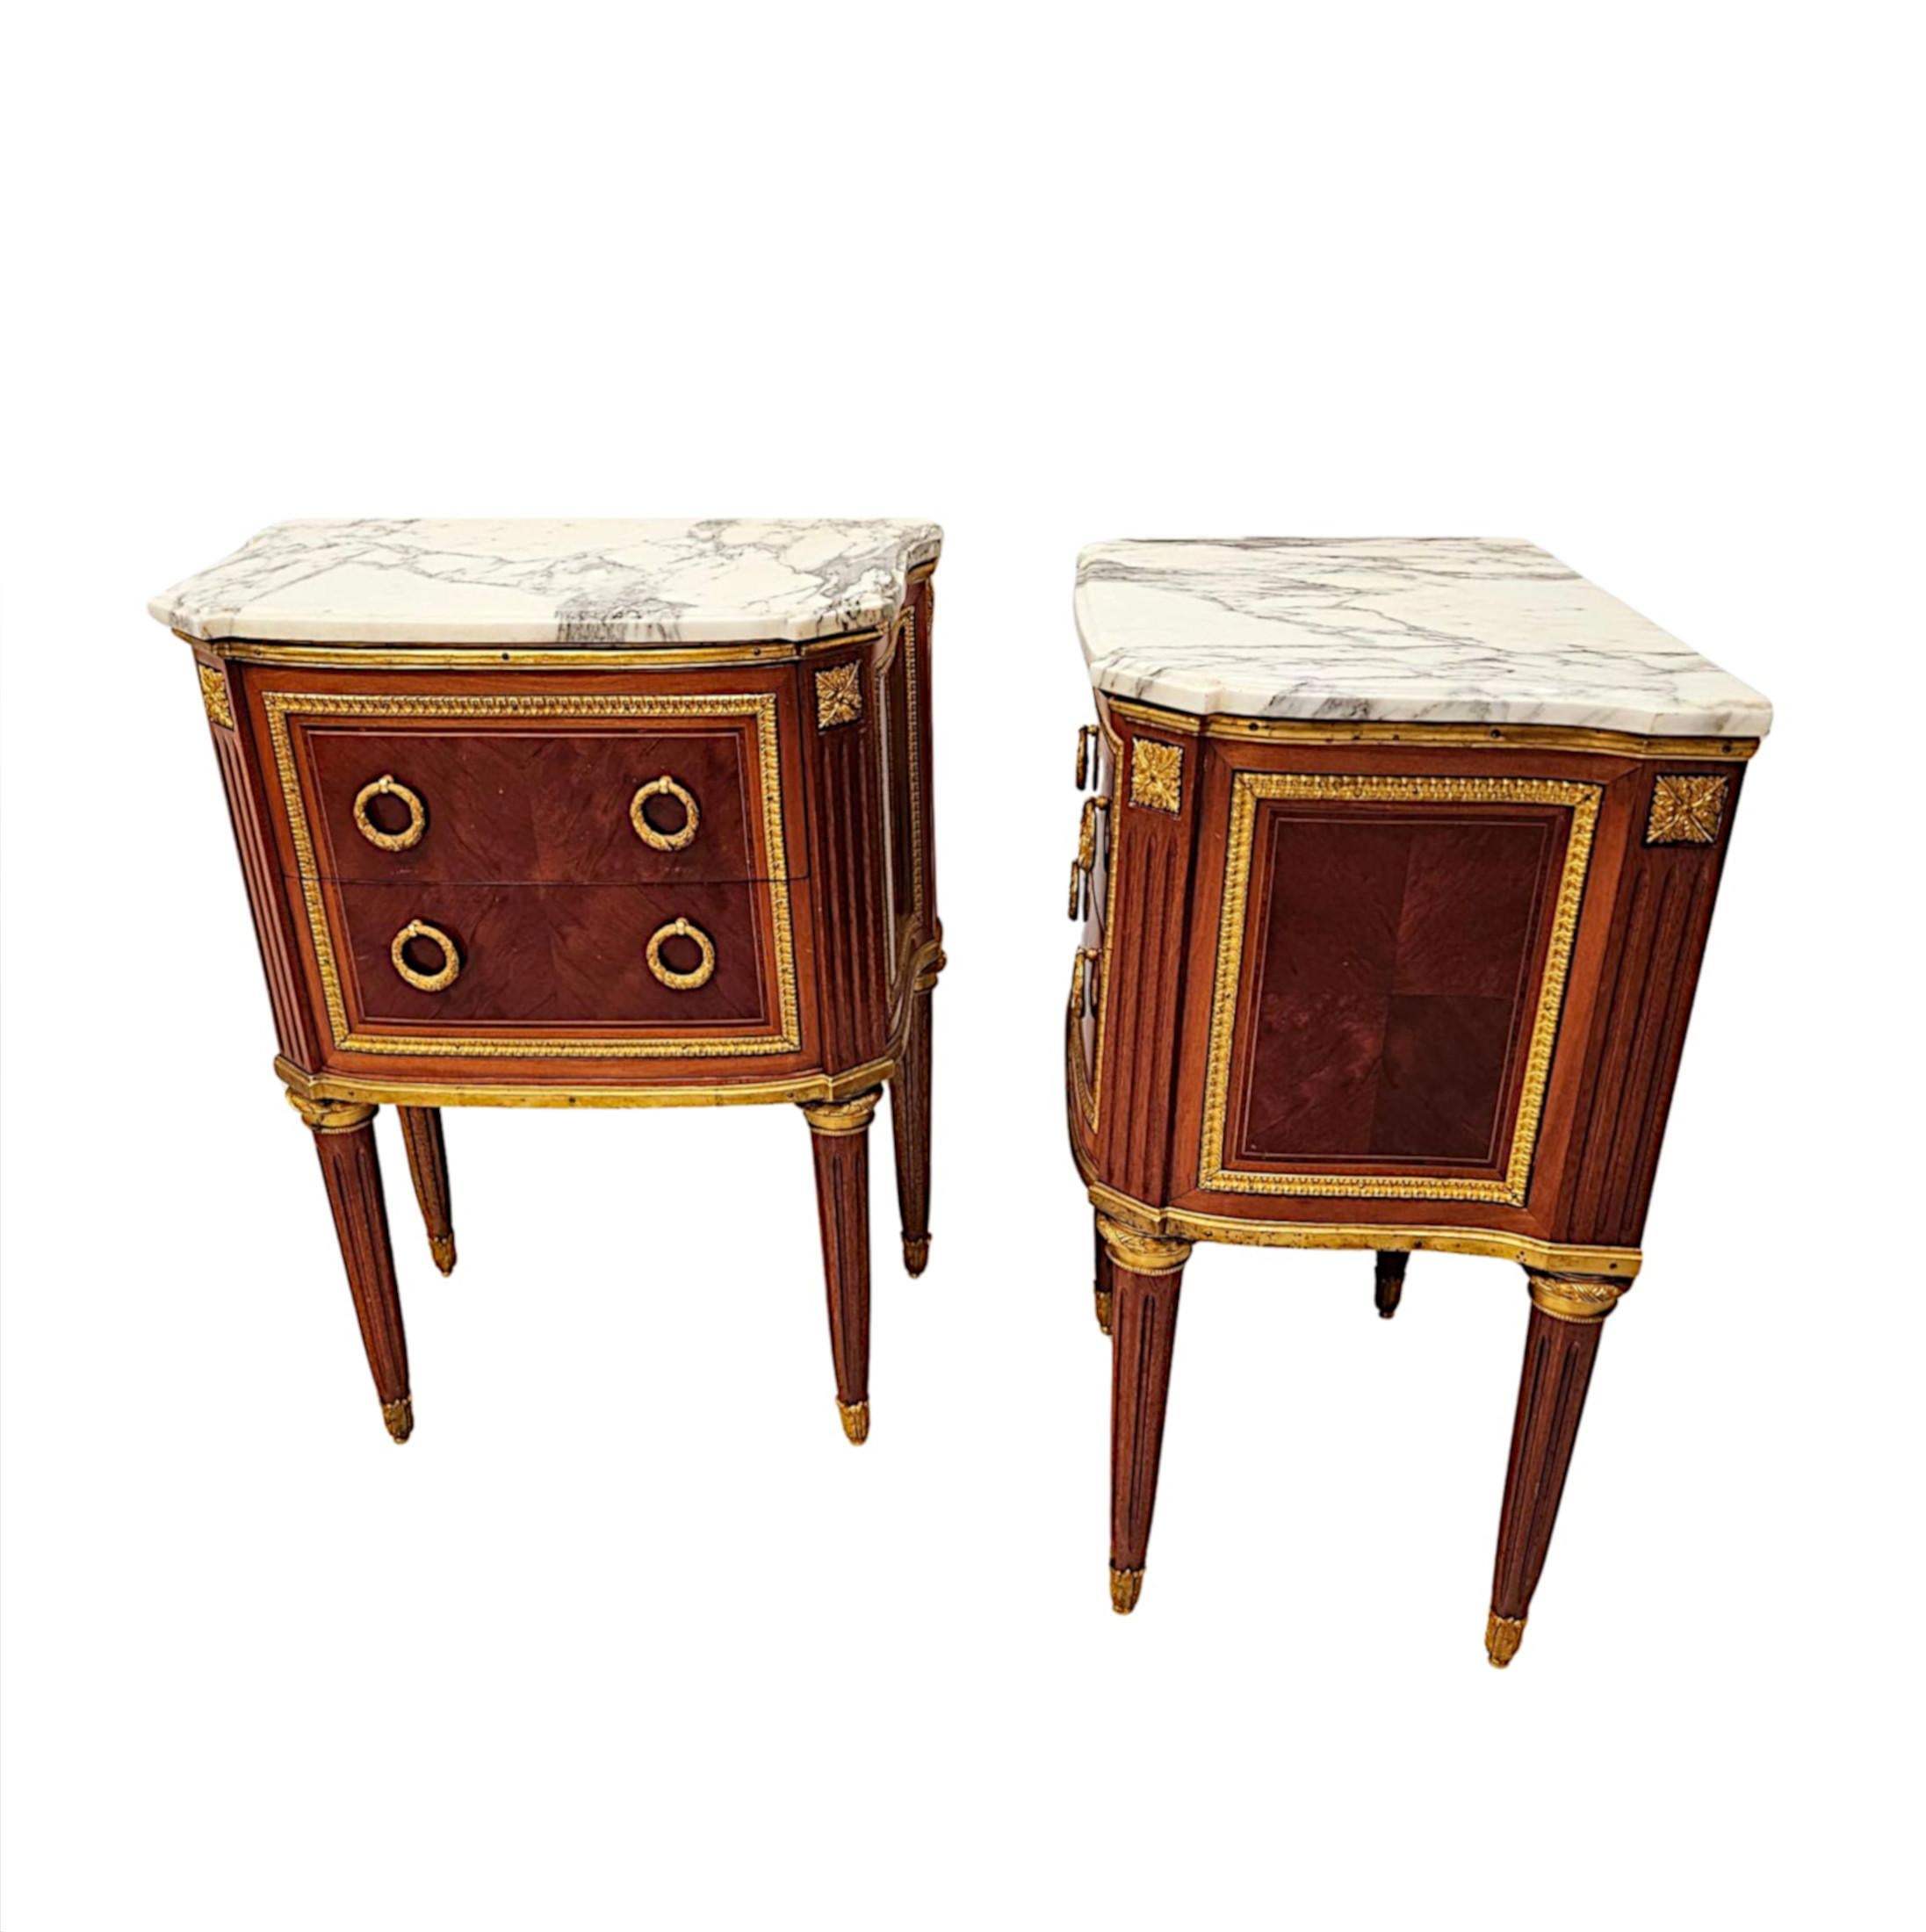 A  Fine 20th Century Pair of Marble Top Side Tables or Chests with Ormolu Mounts For Sale 1